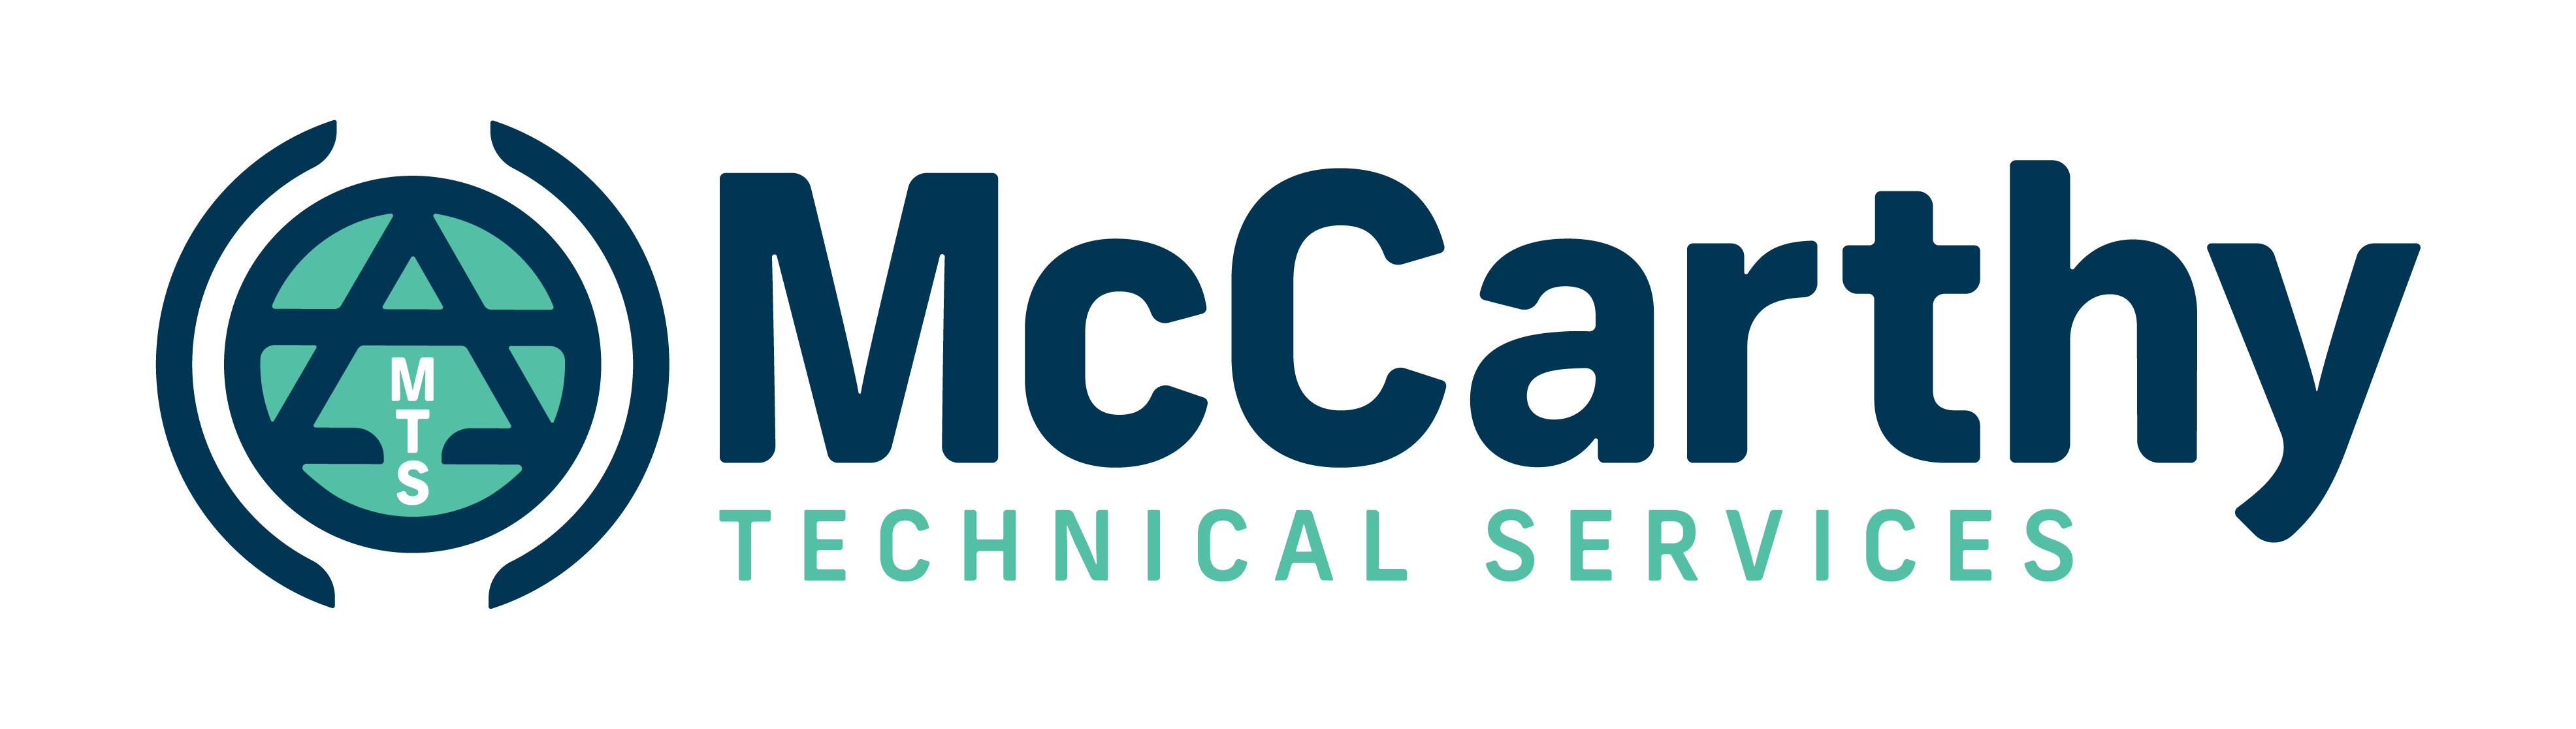 McCarthy Technical Services, LLC profile on Qualified.One